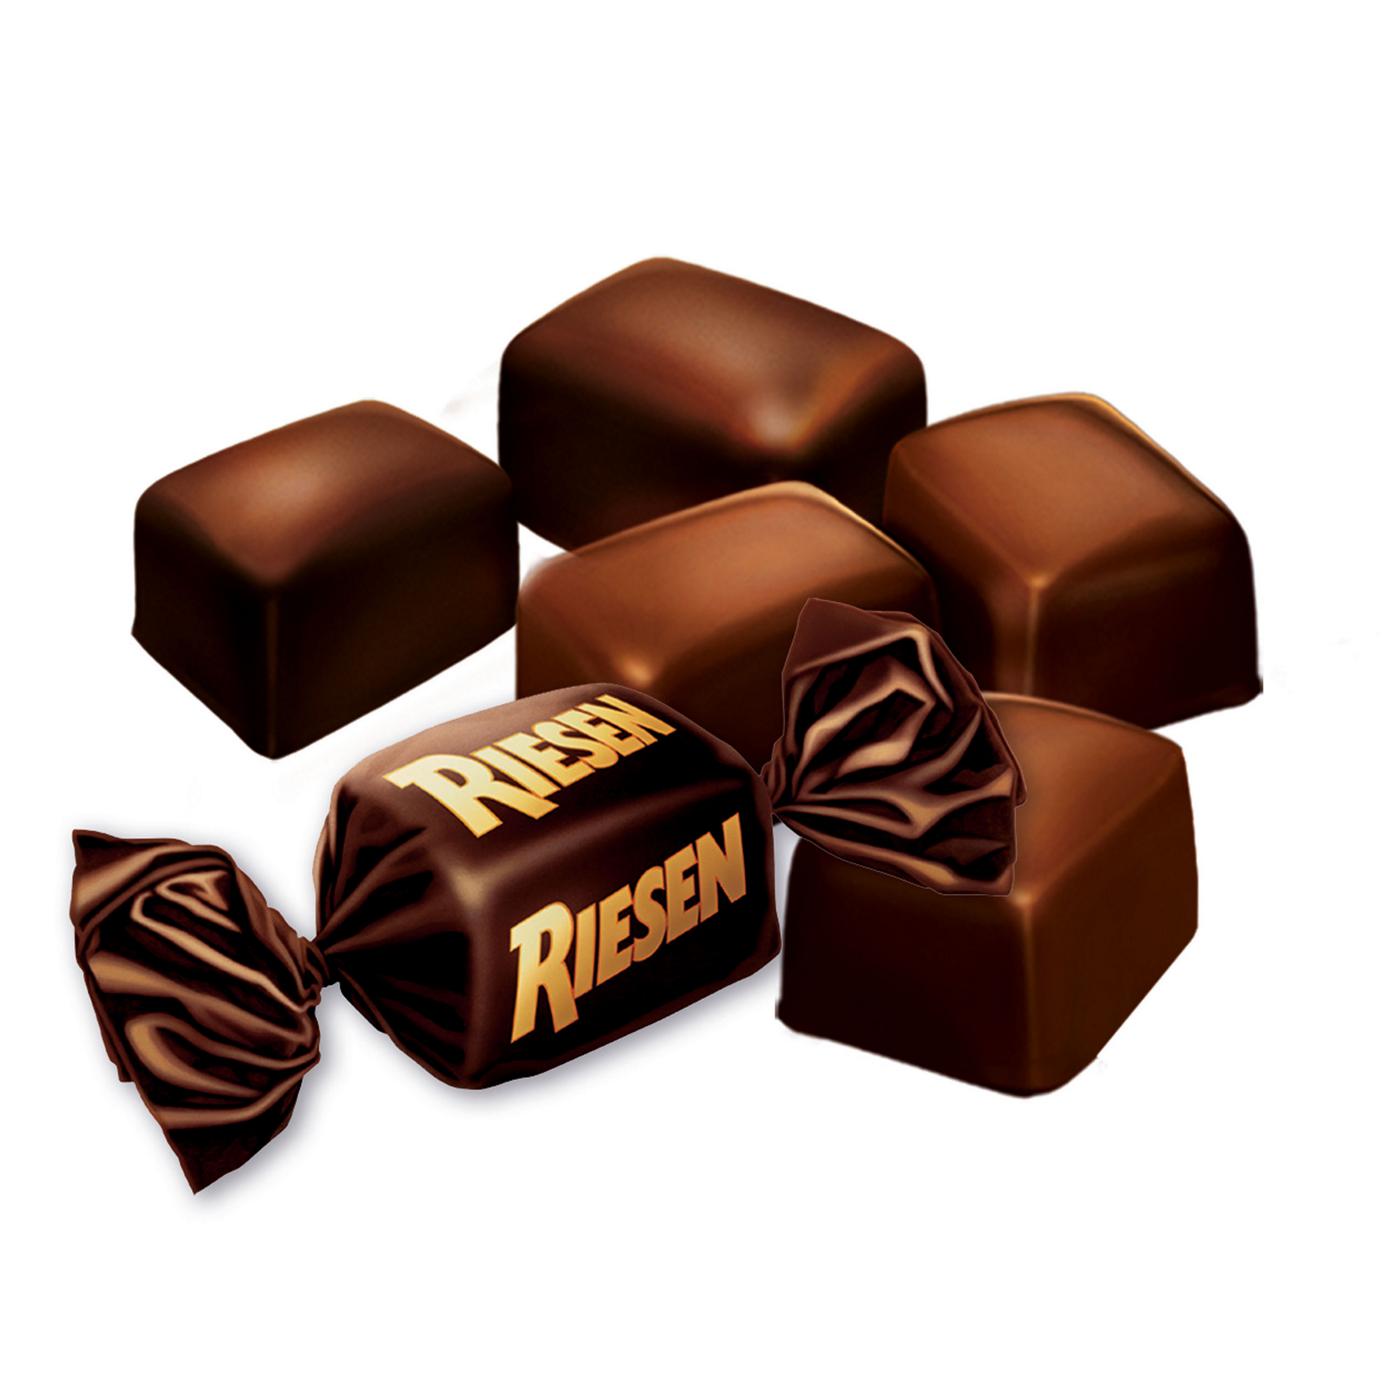 Riesen Chocolate Covered Chewy Caramel Candy; image 4 of 6